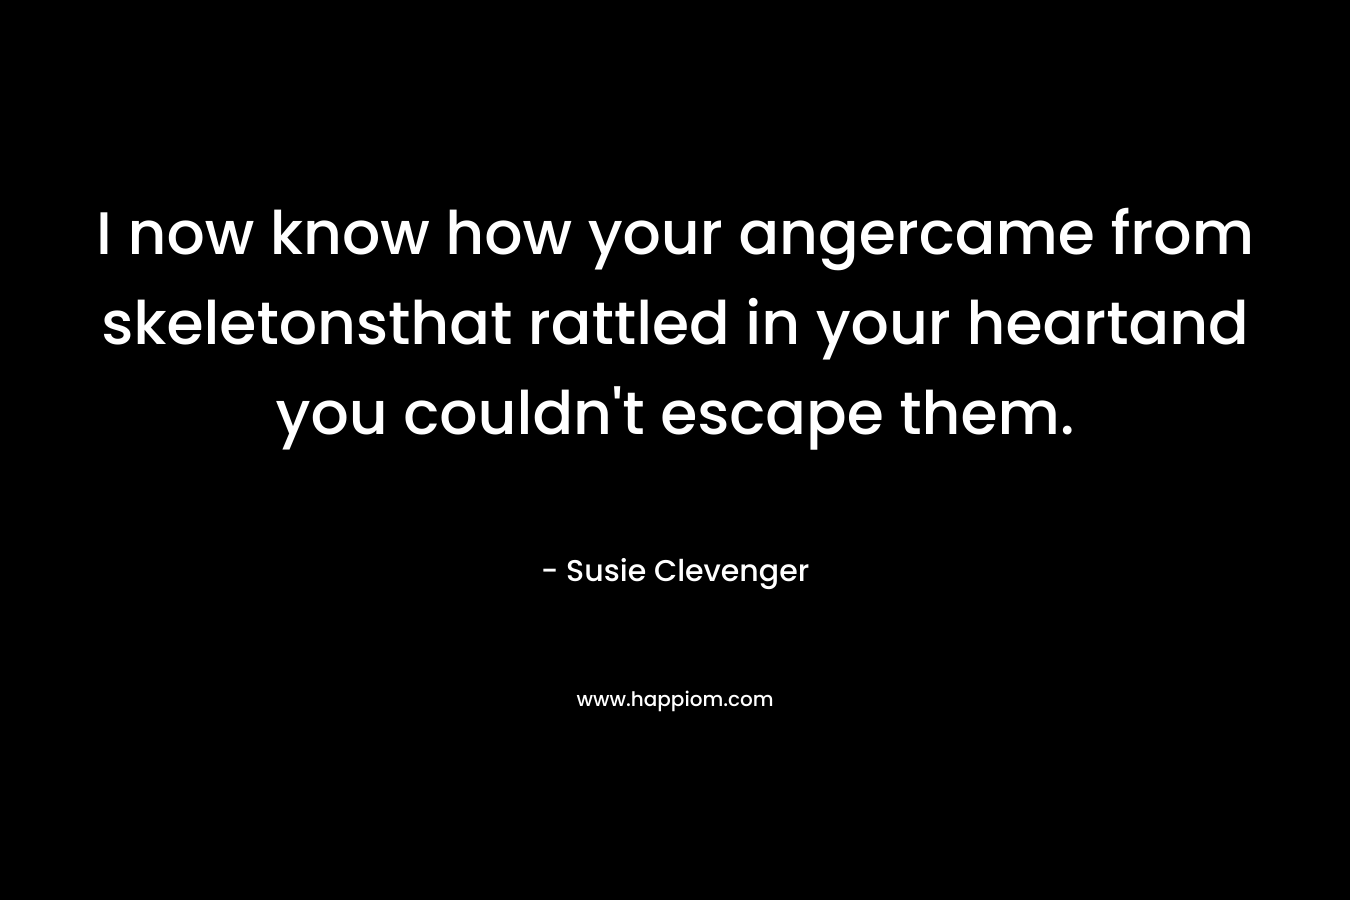 I now know how your angercame from skeletonsthat rattled in your heartand you couldn’t escape them. – Susie Clevenger